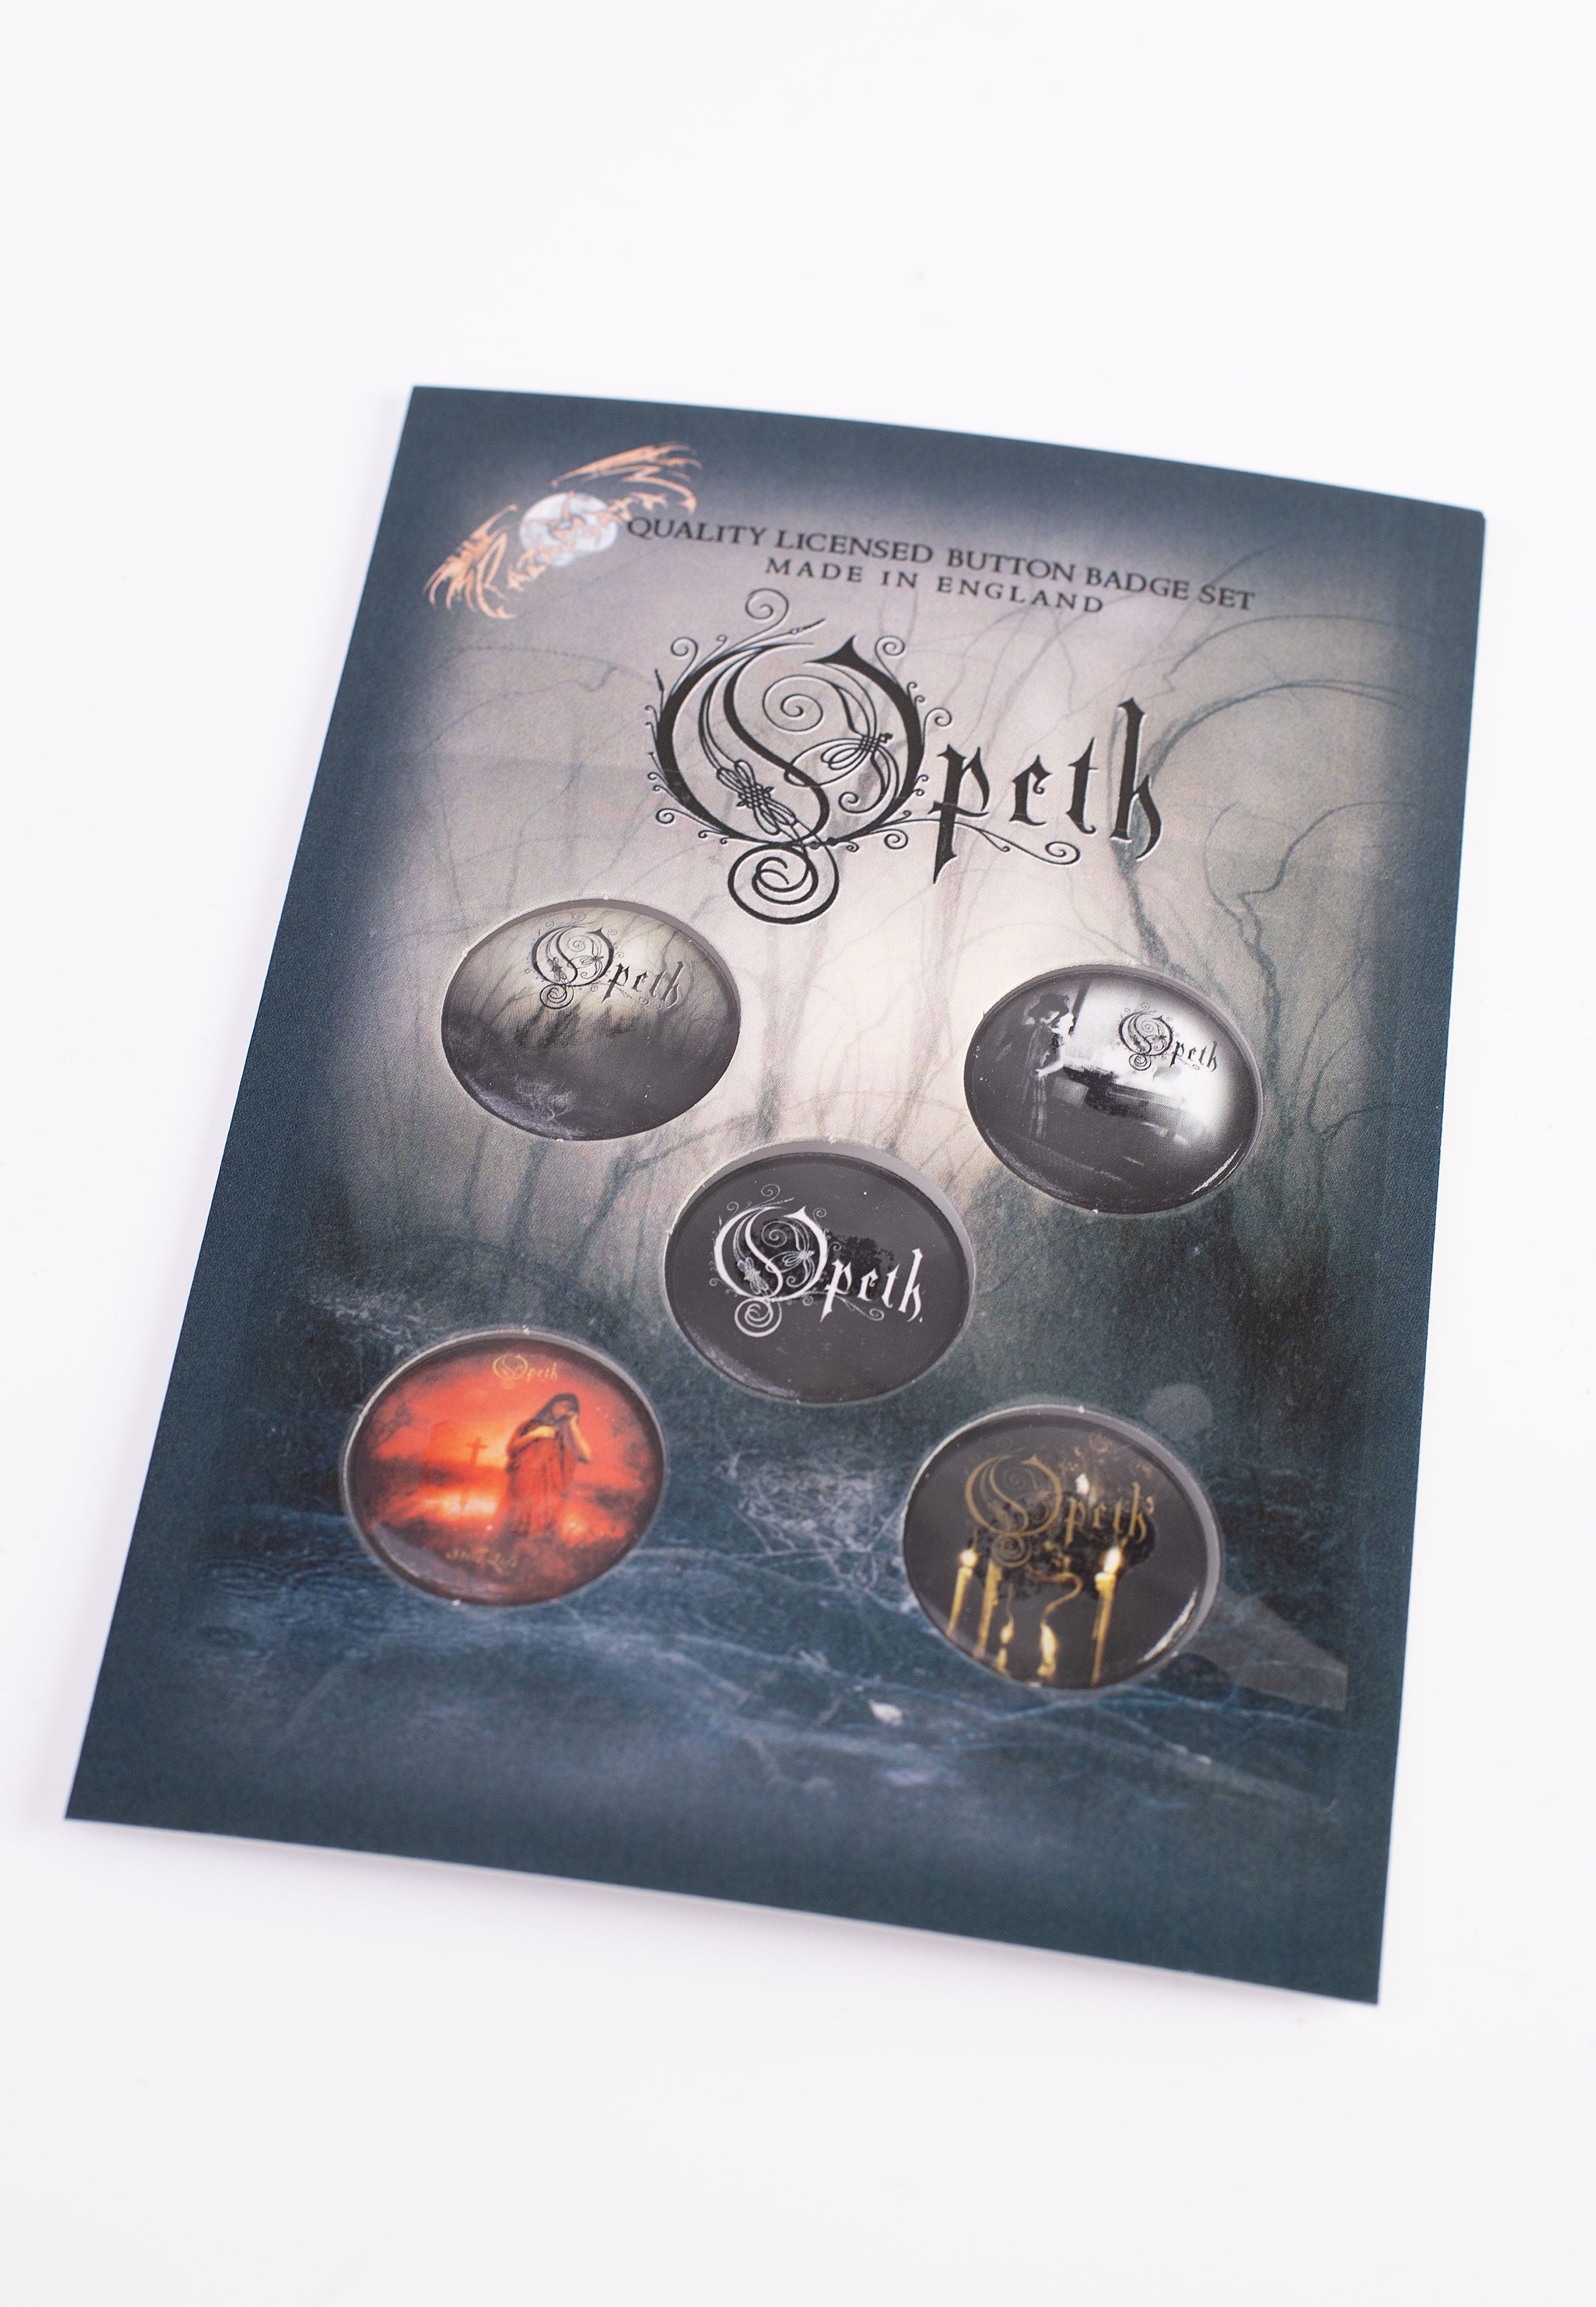 Opeth - Classic Albums - Button